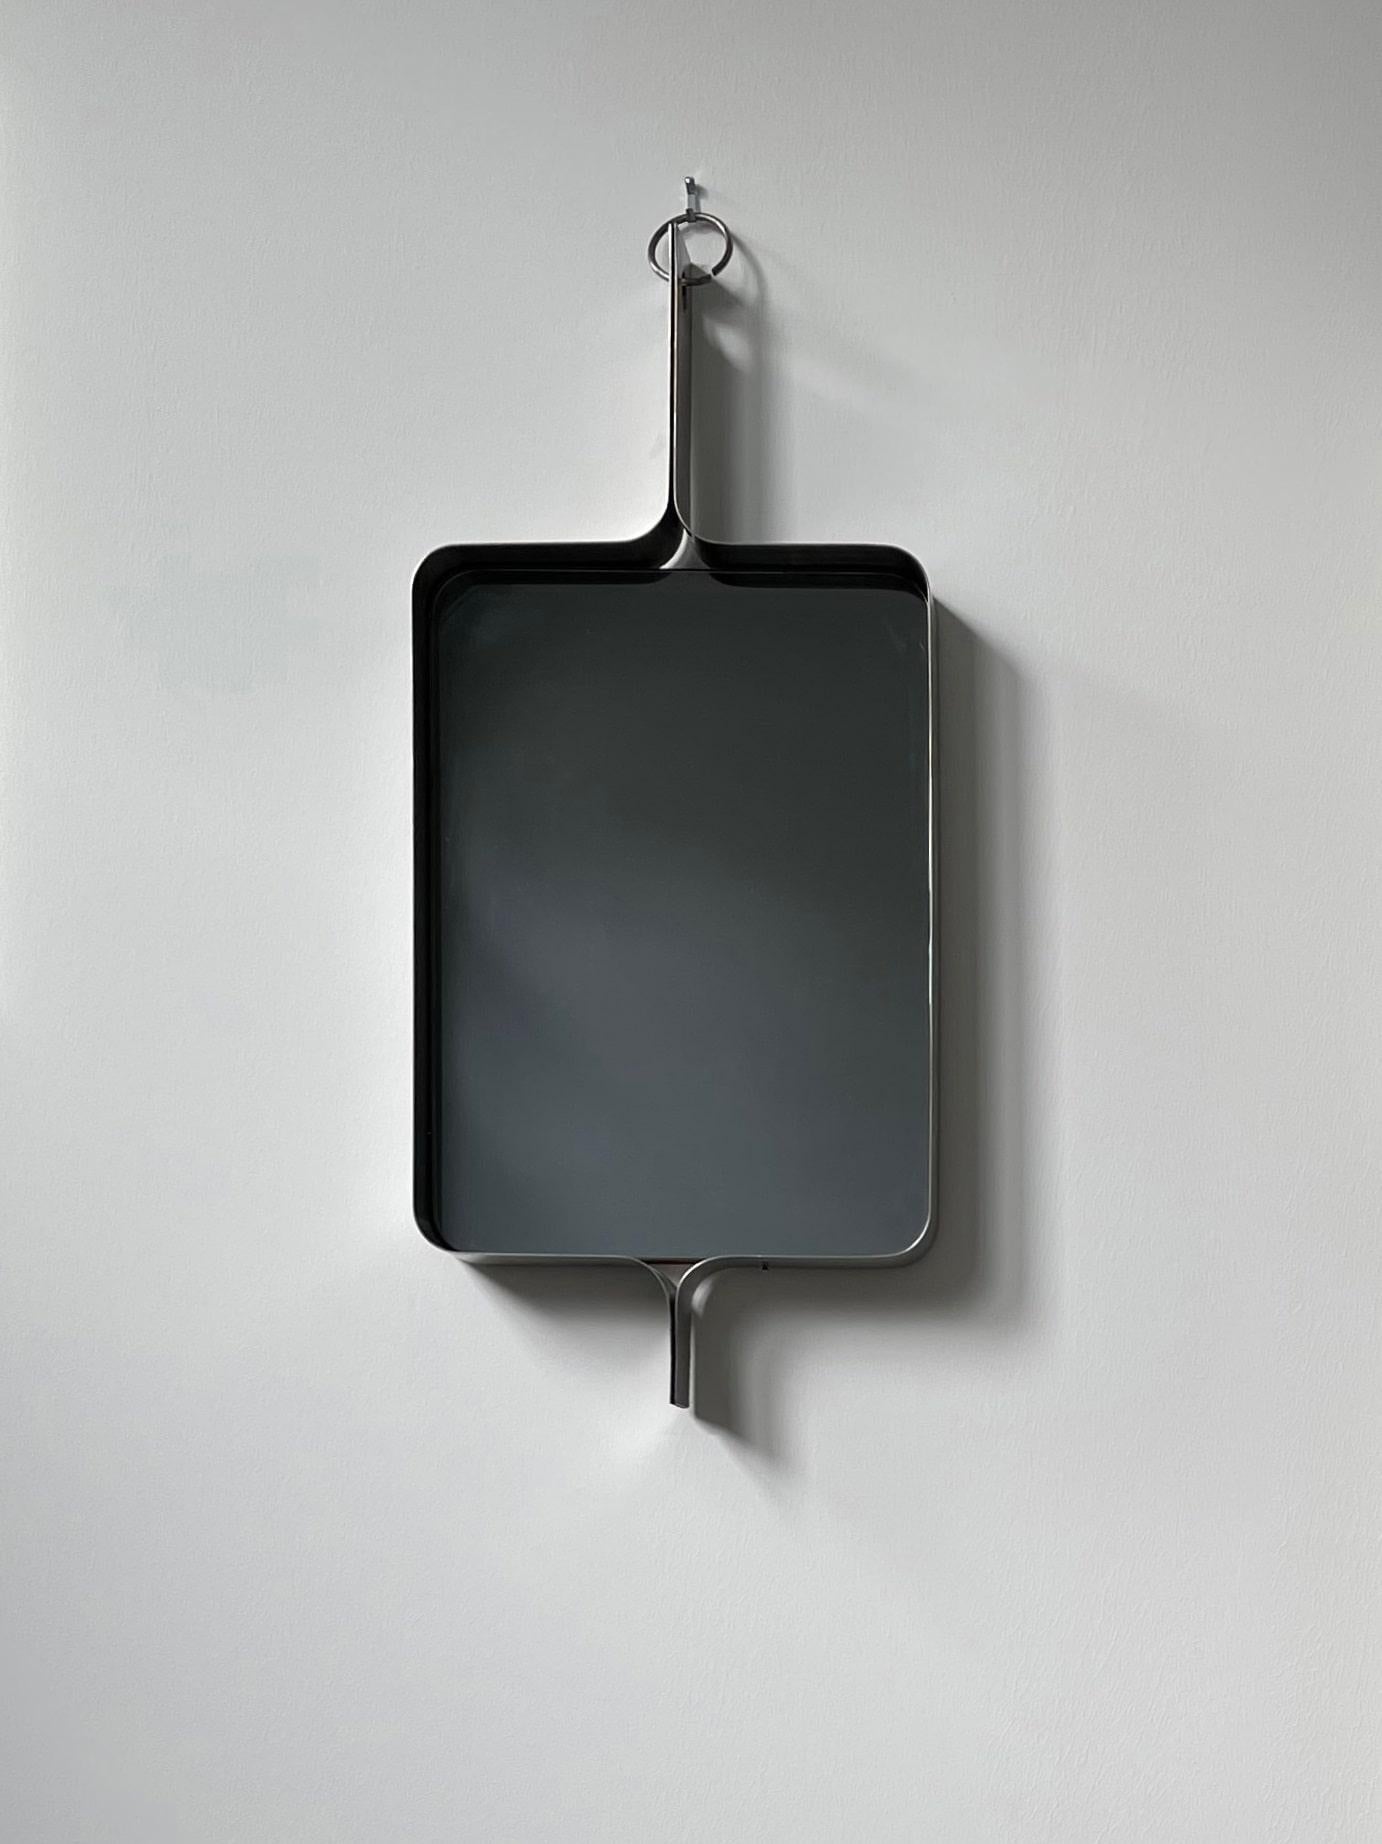 French Xavier Féal Stainless Steel Smoked Mirror Original Edition For Sale